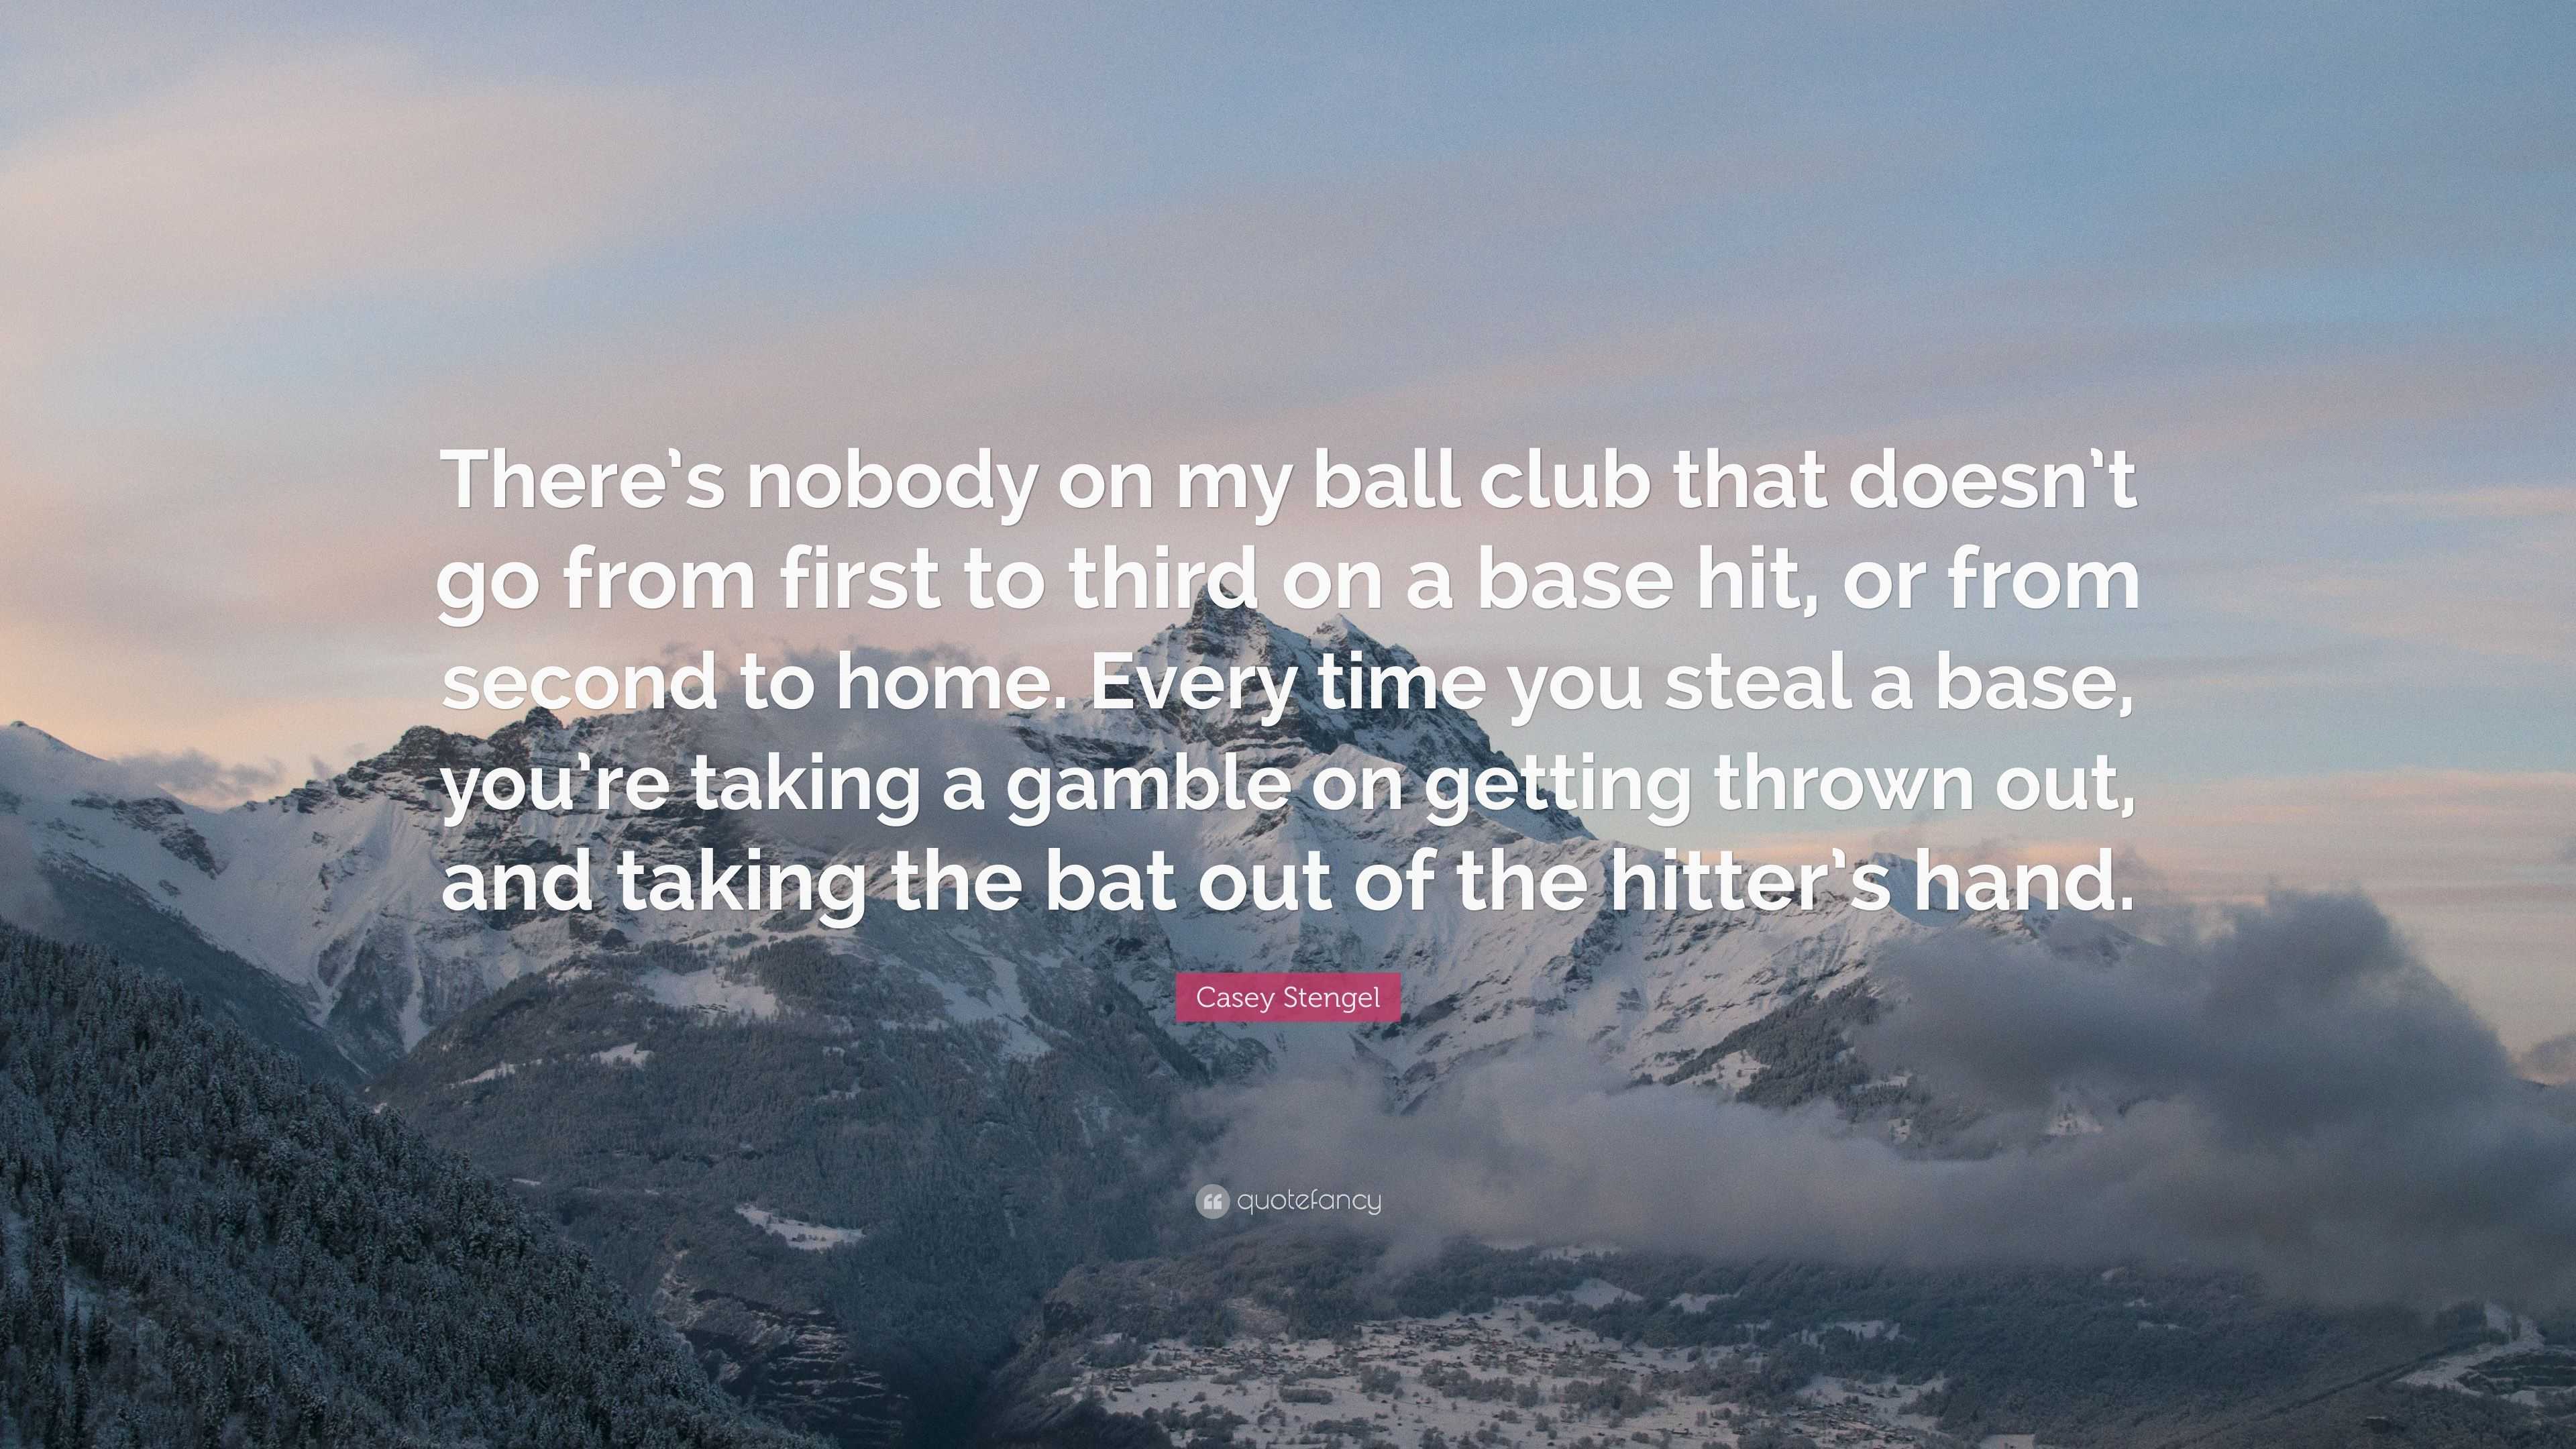 Casey Stengel Quote: “There’s nobody on my ball club that doesn’t go ...